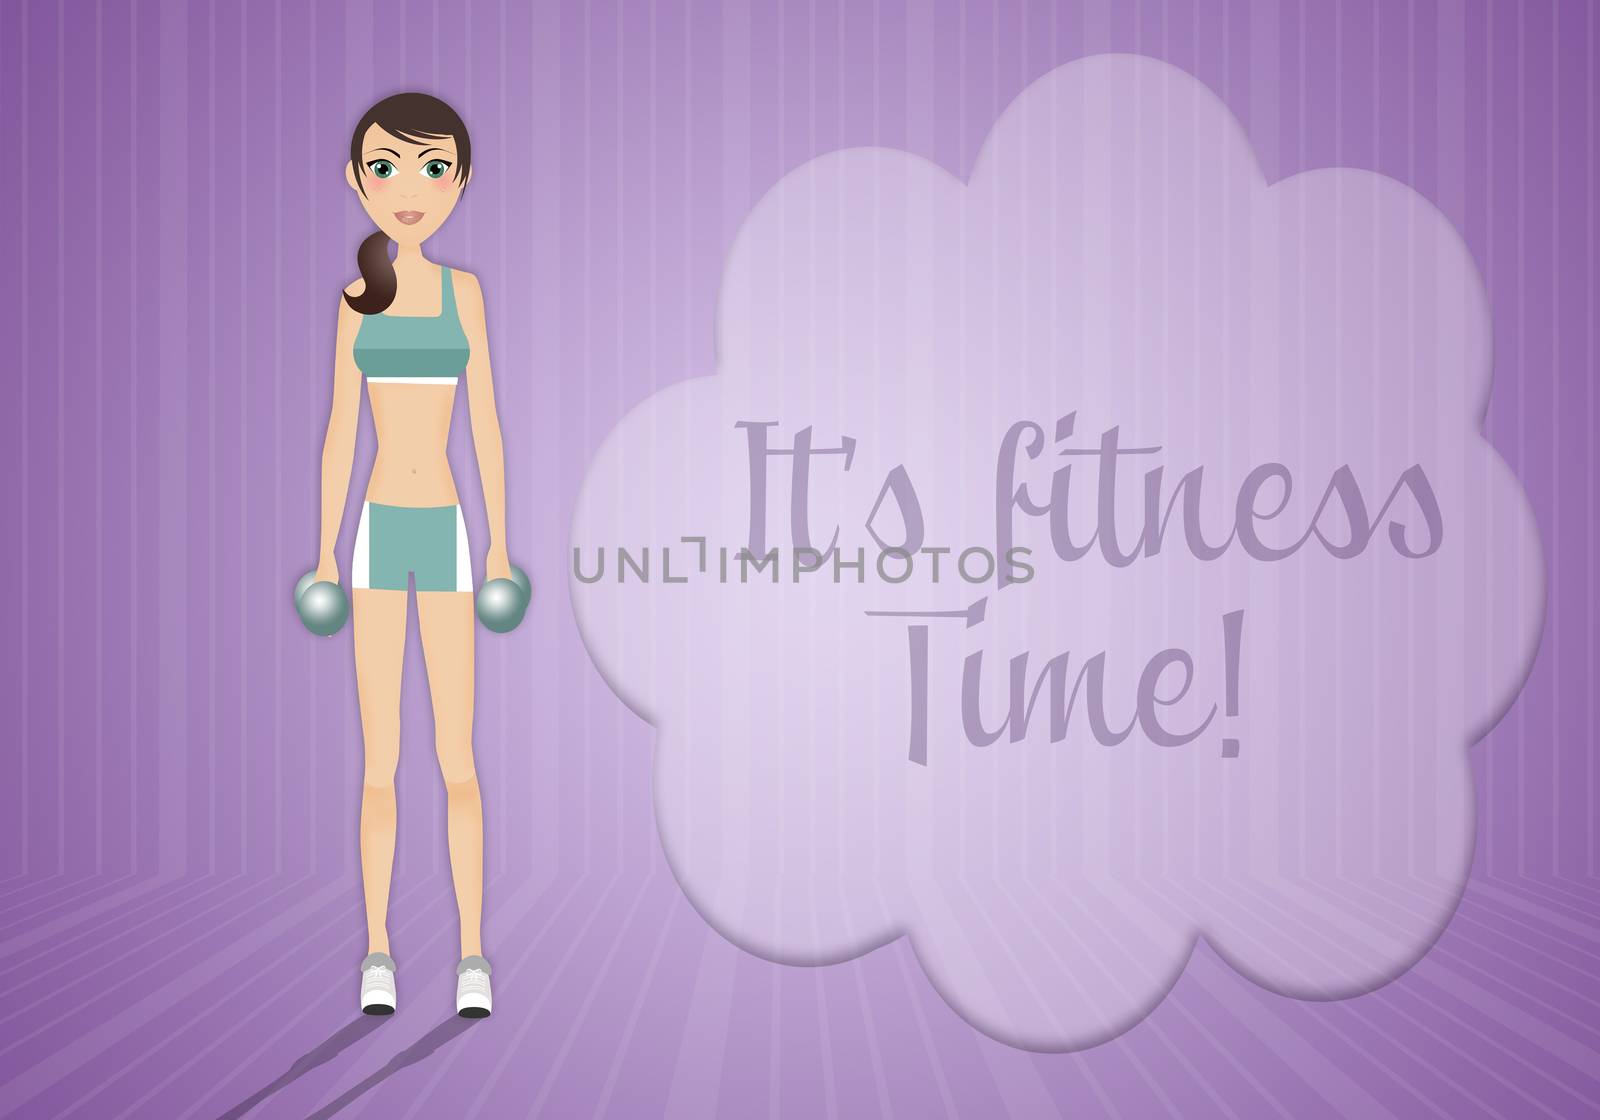 illustration of a woman doing fitness